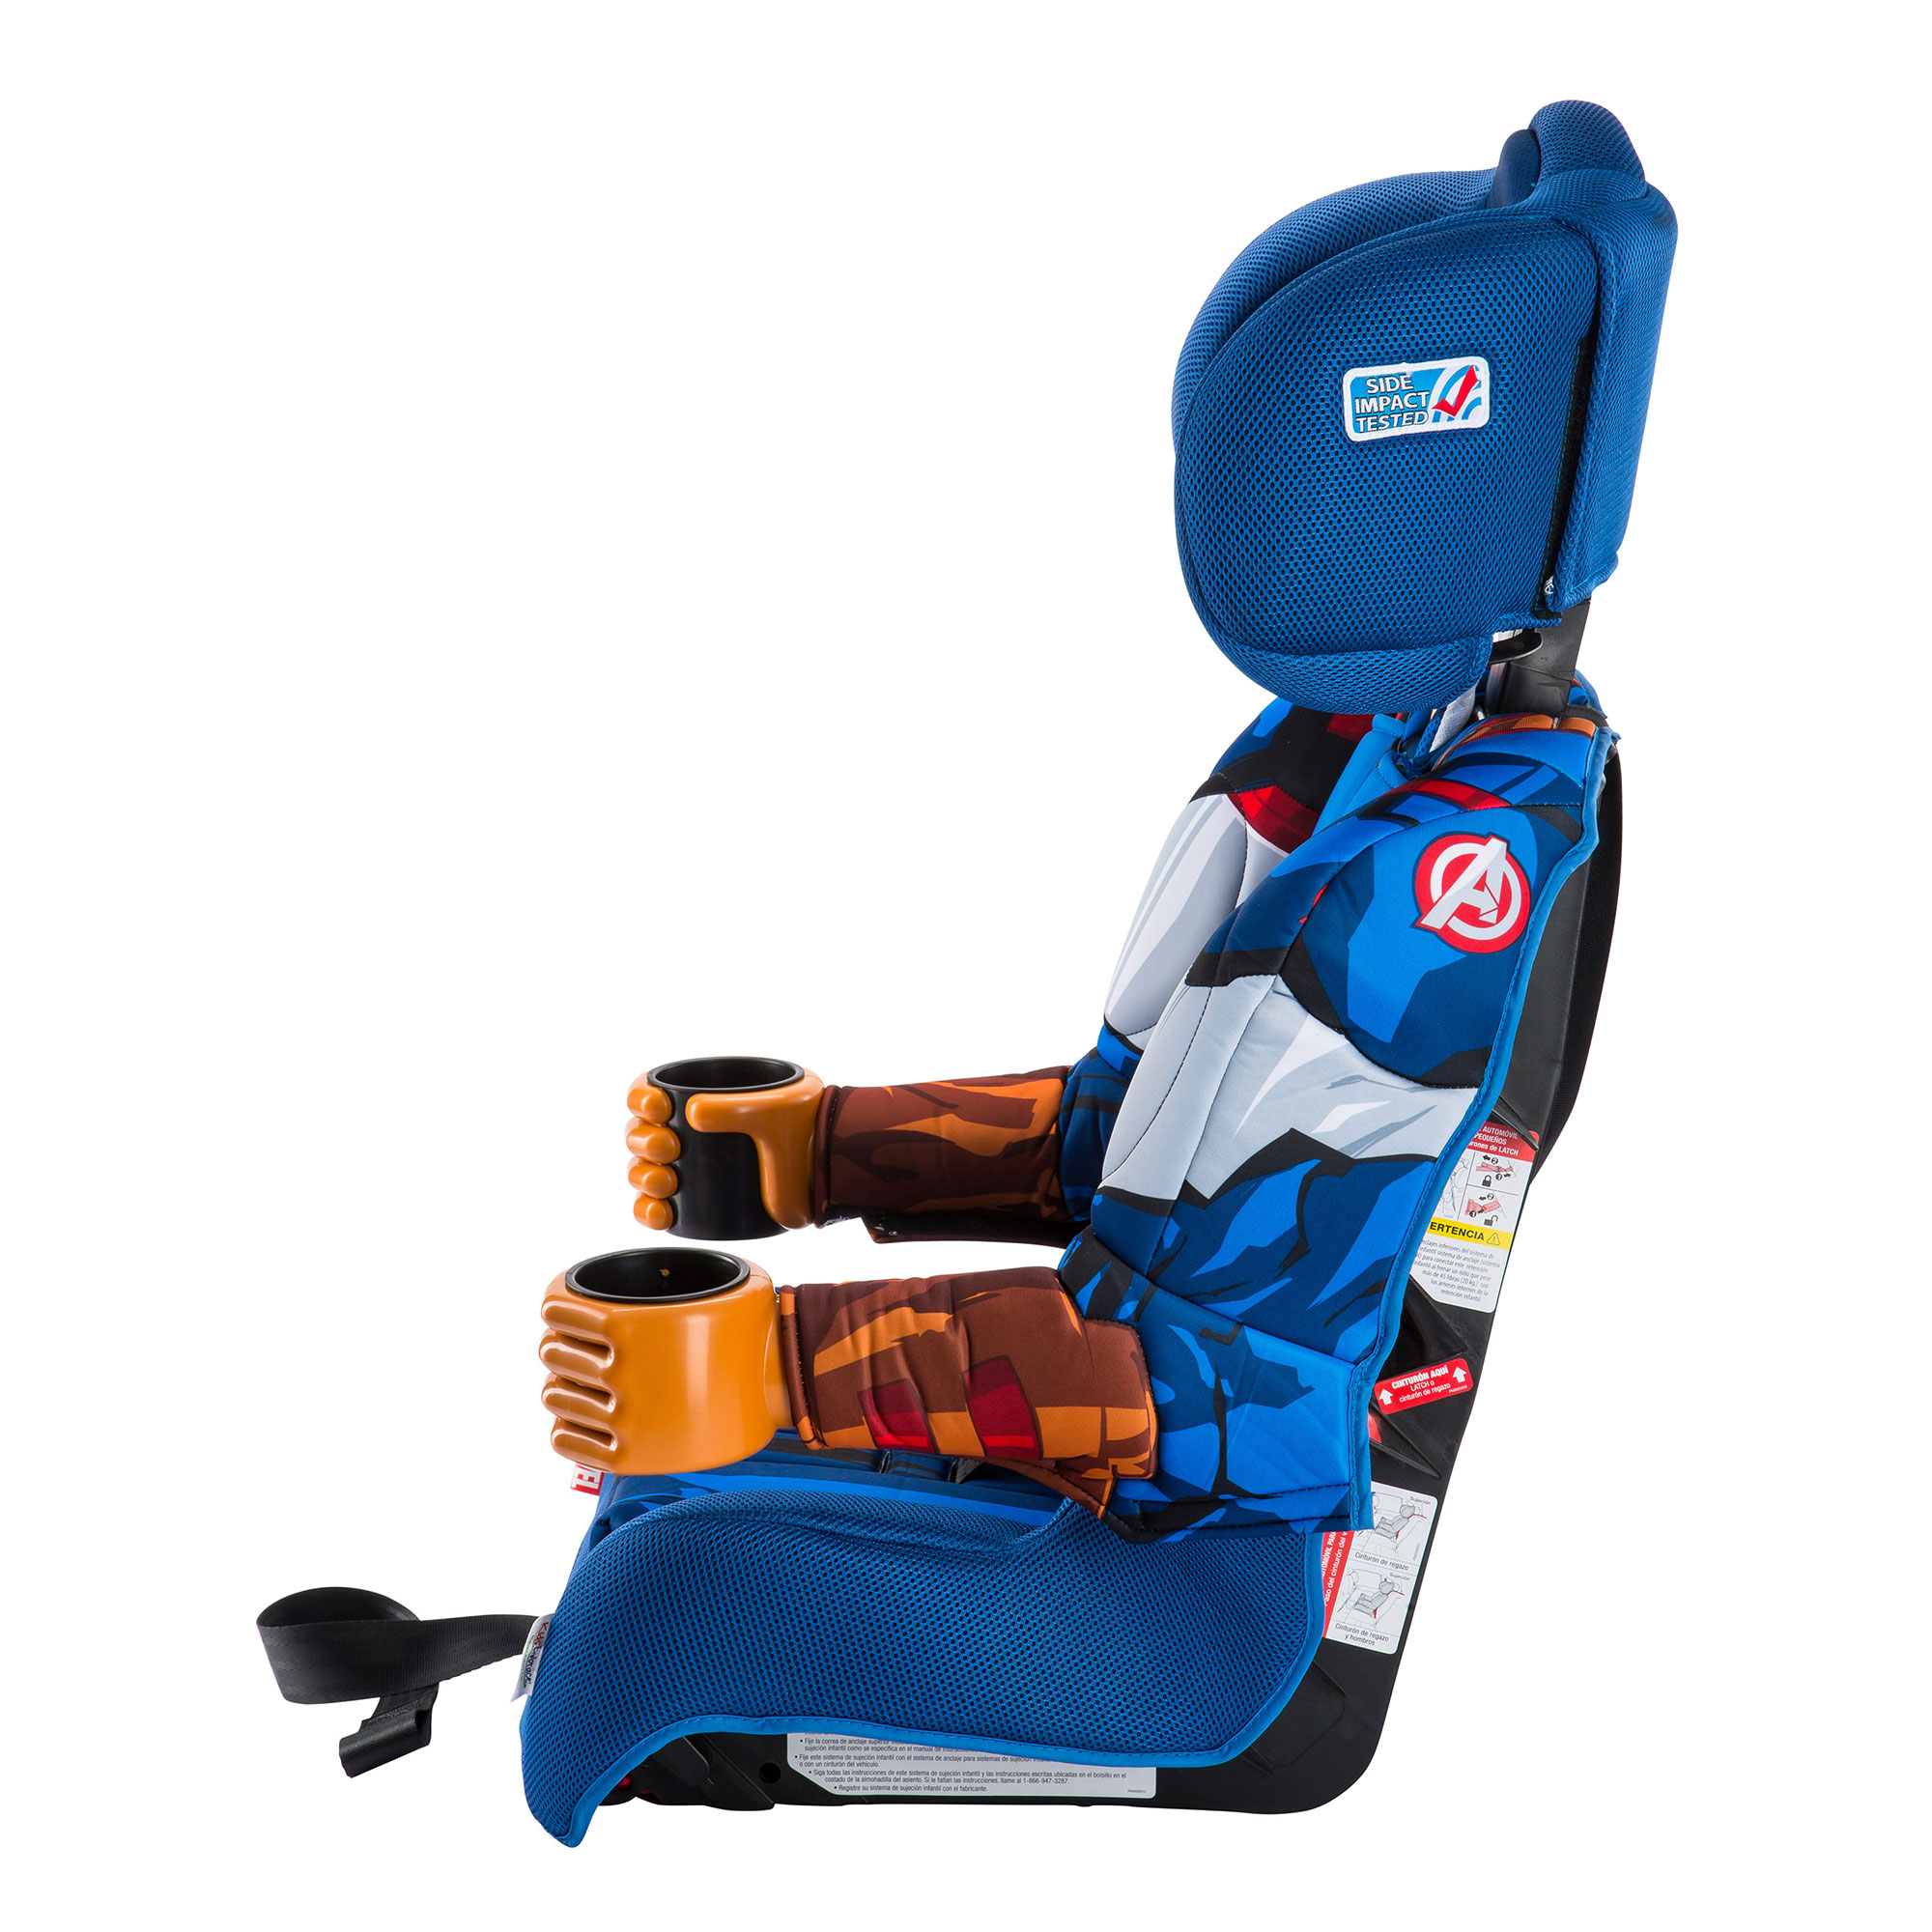 KidsEmbrace Combination Harness Booster Car Seat, Marvel Avengers Captain America - image 4 of 6